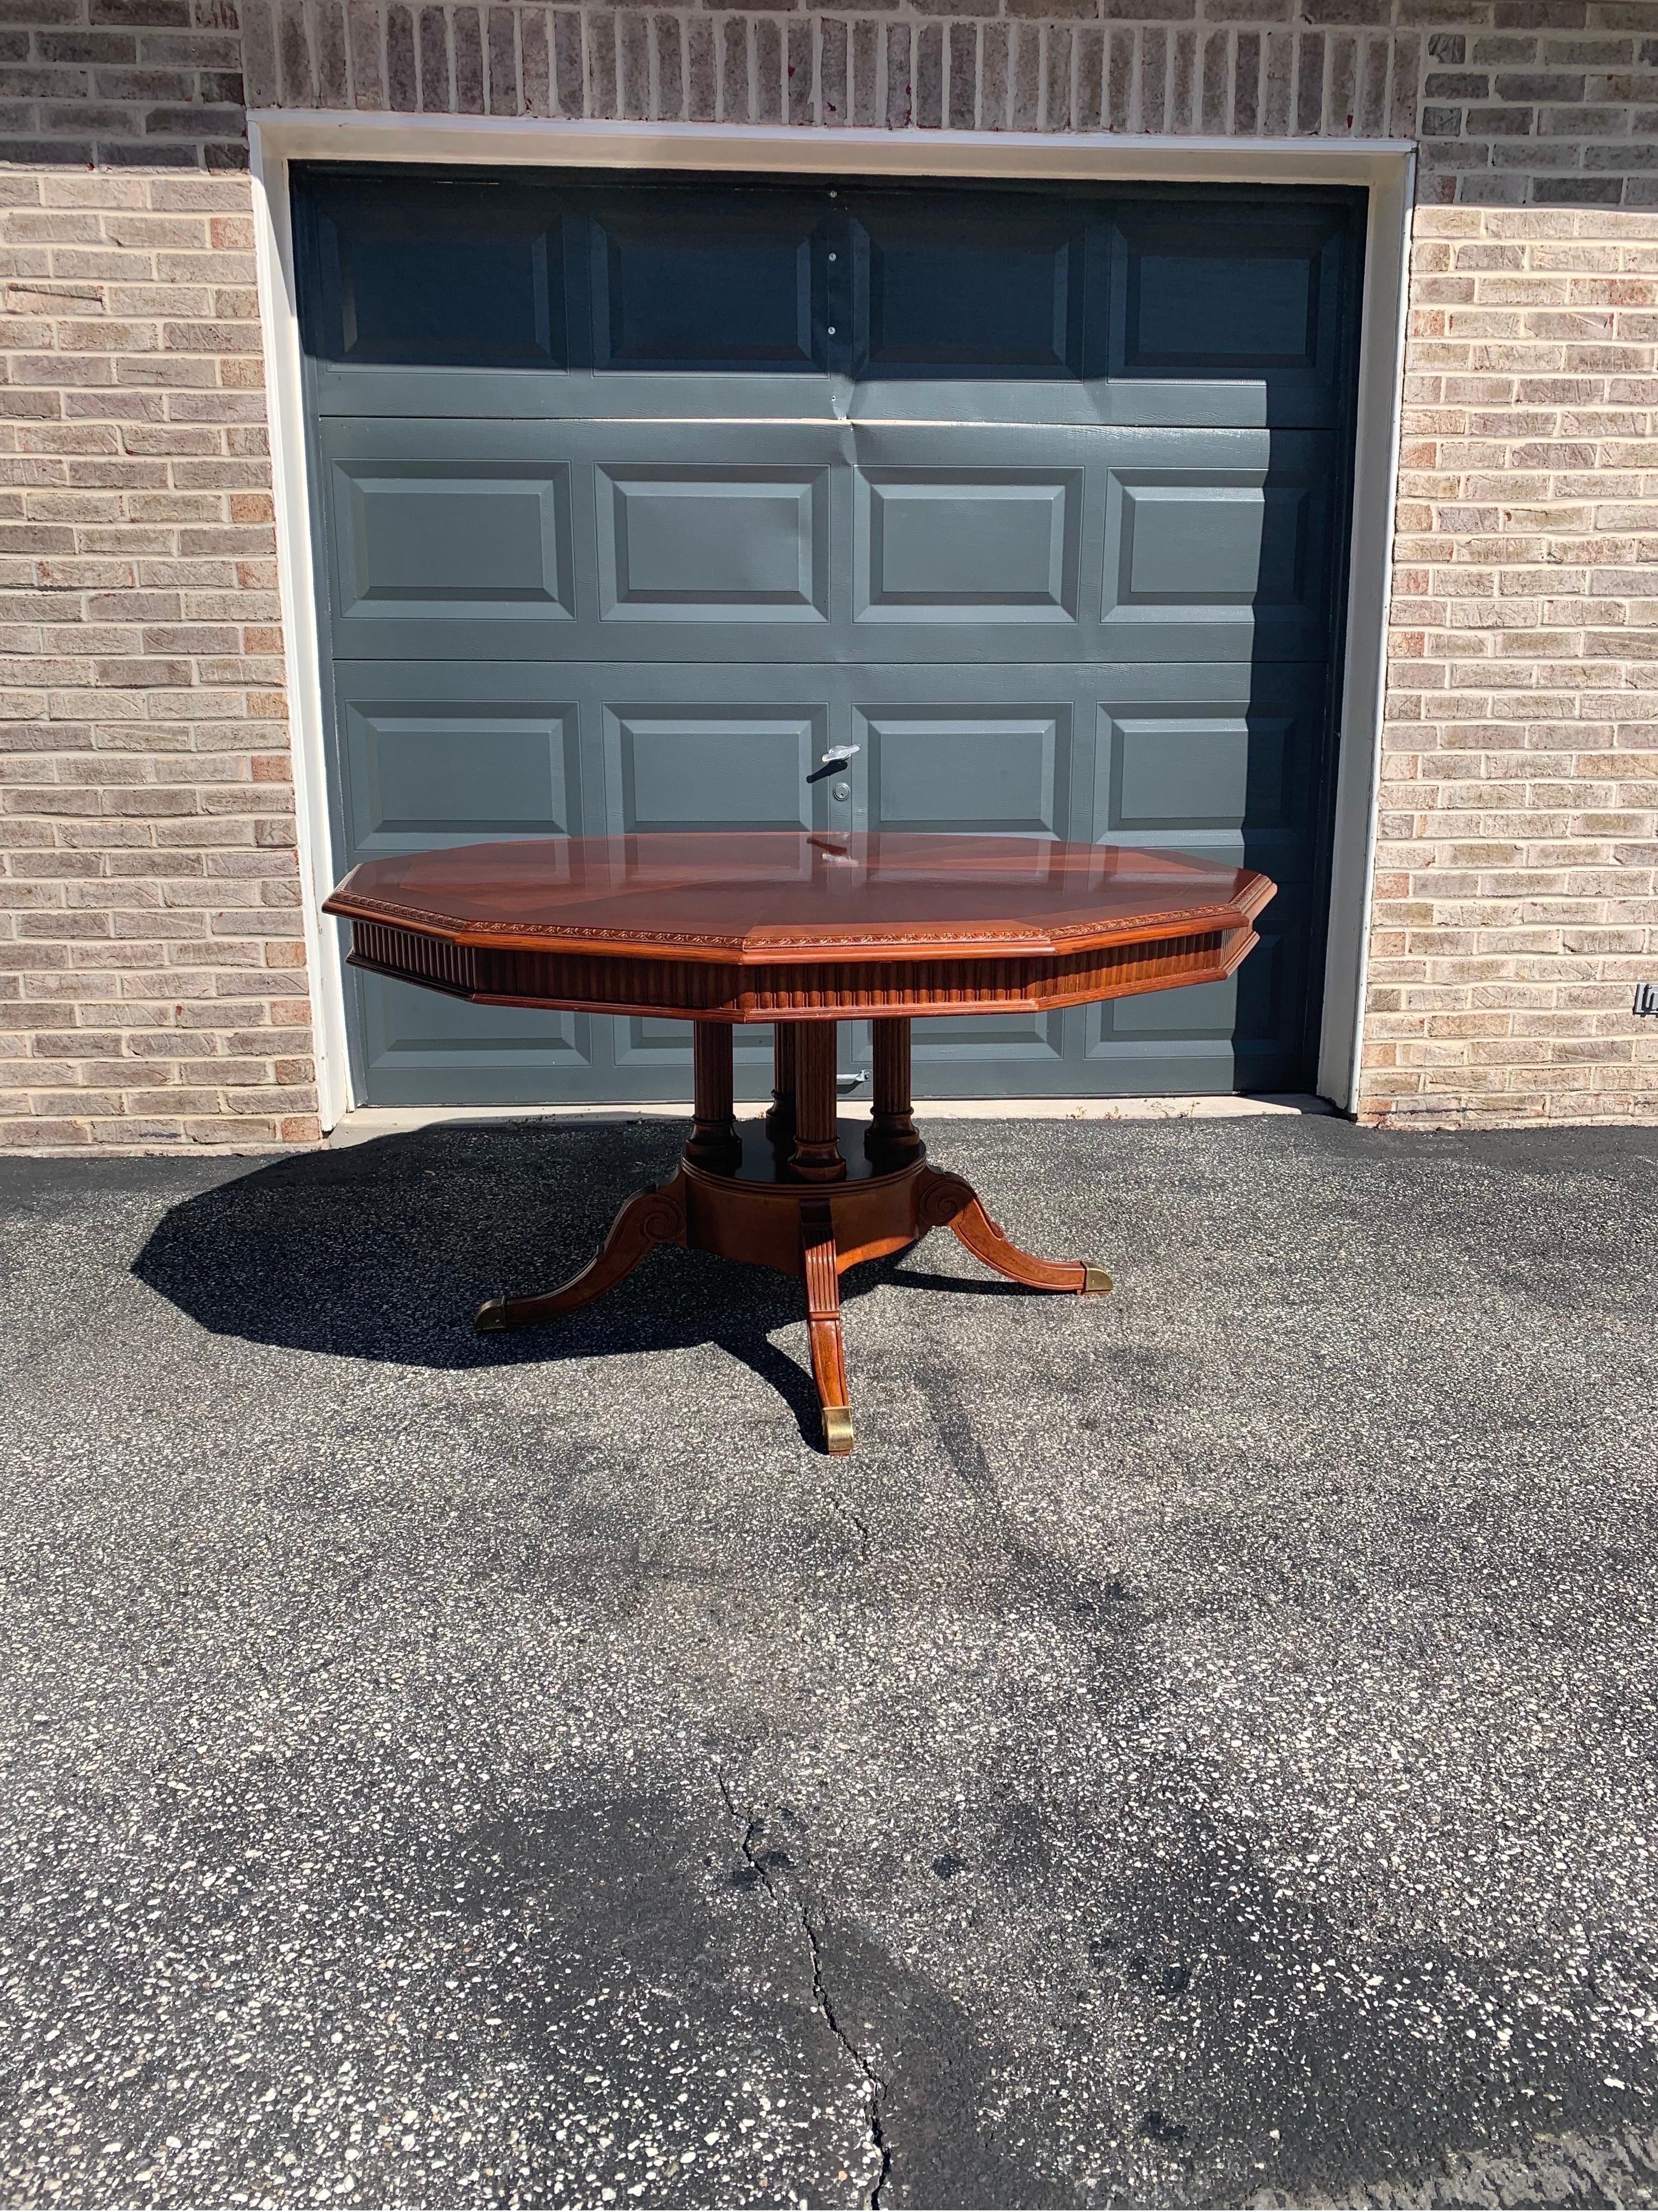 Elegant and classic dodecagon 12 sided cherry inlaid table by Universal Furniture. Cherry inlaid tabletop with egg and dart edging, pie cut cherry field, brass capped feet with four fluted columns atop the pedestal base. Table is very sturdy and